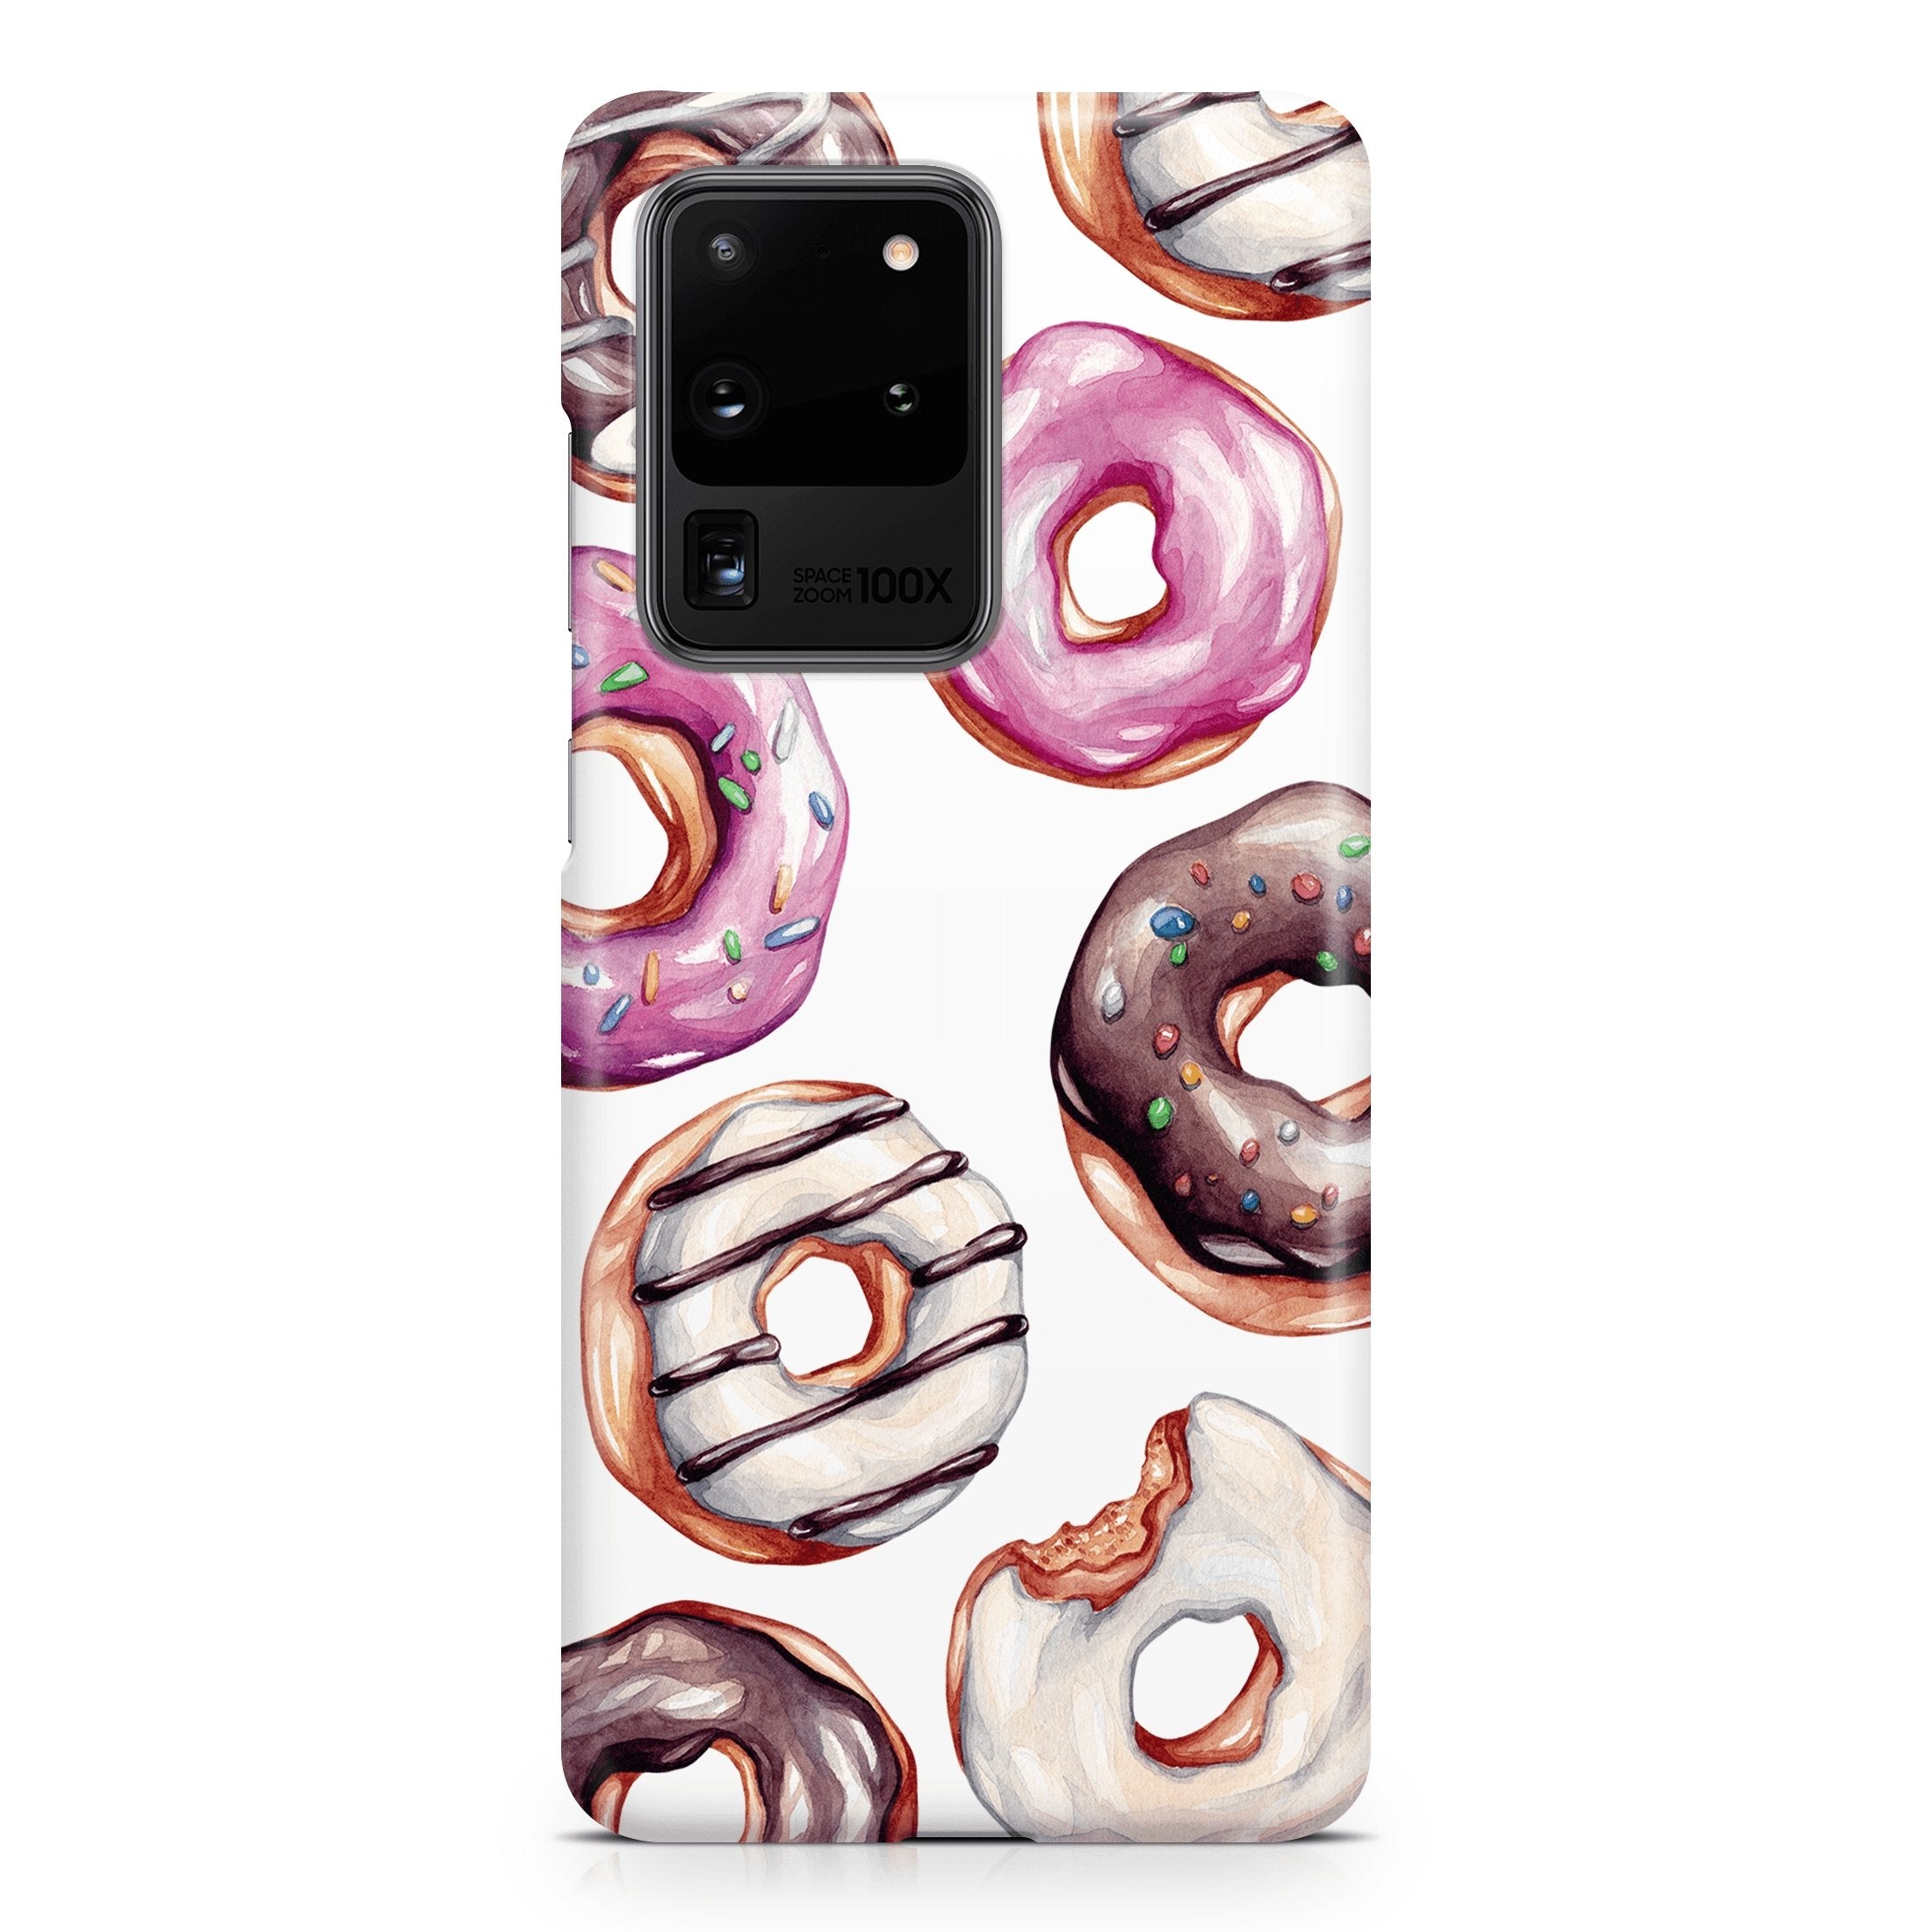 Donuts - Samsung phone case designs by CaseSwagger